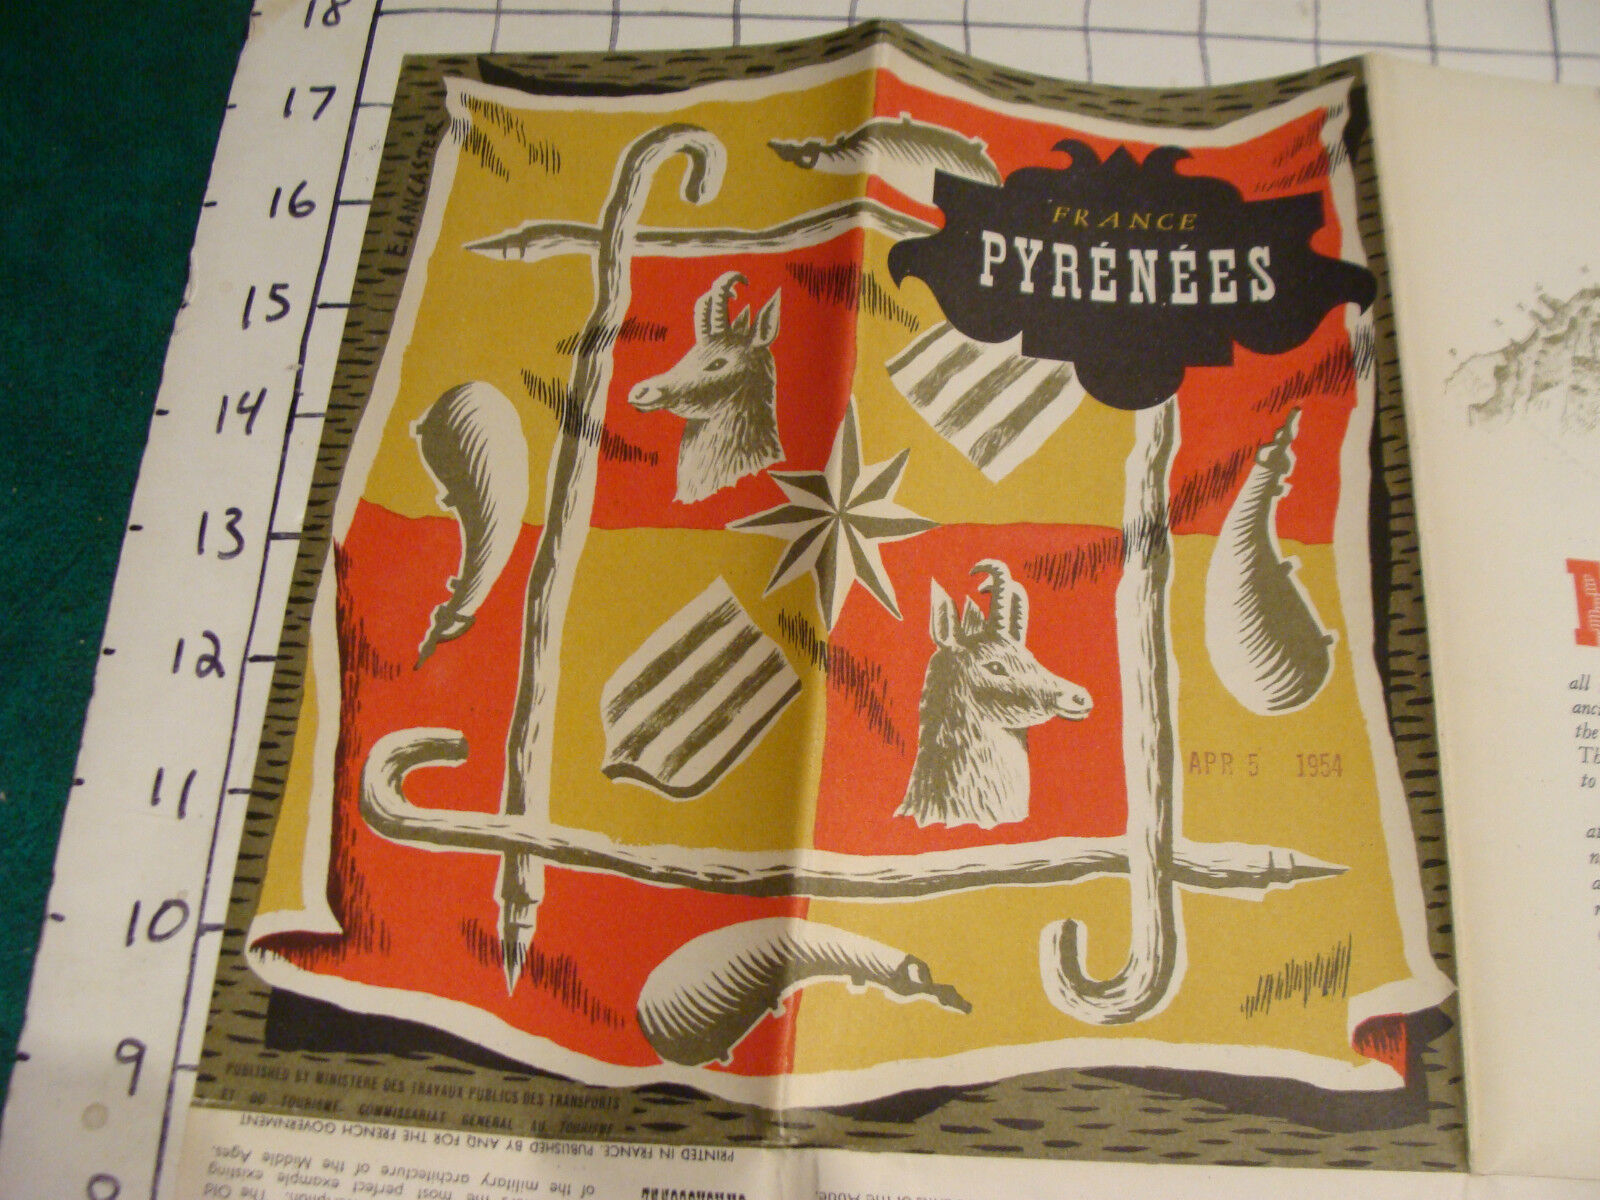  GREAT VINTAGE  brochure: 1954 FRANCE PYRENEES w map, cover art by E. LANCASTER